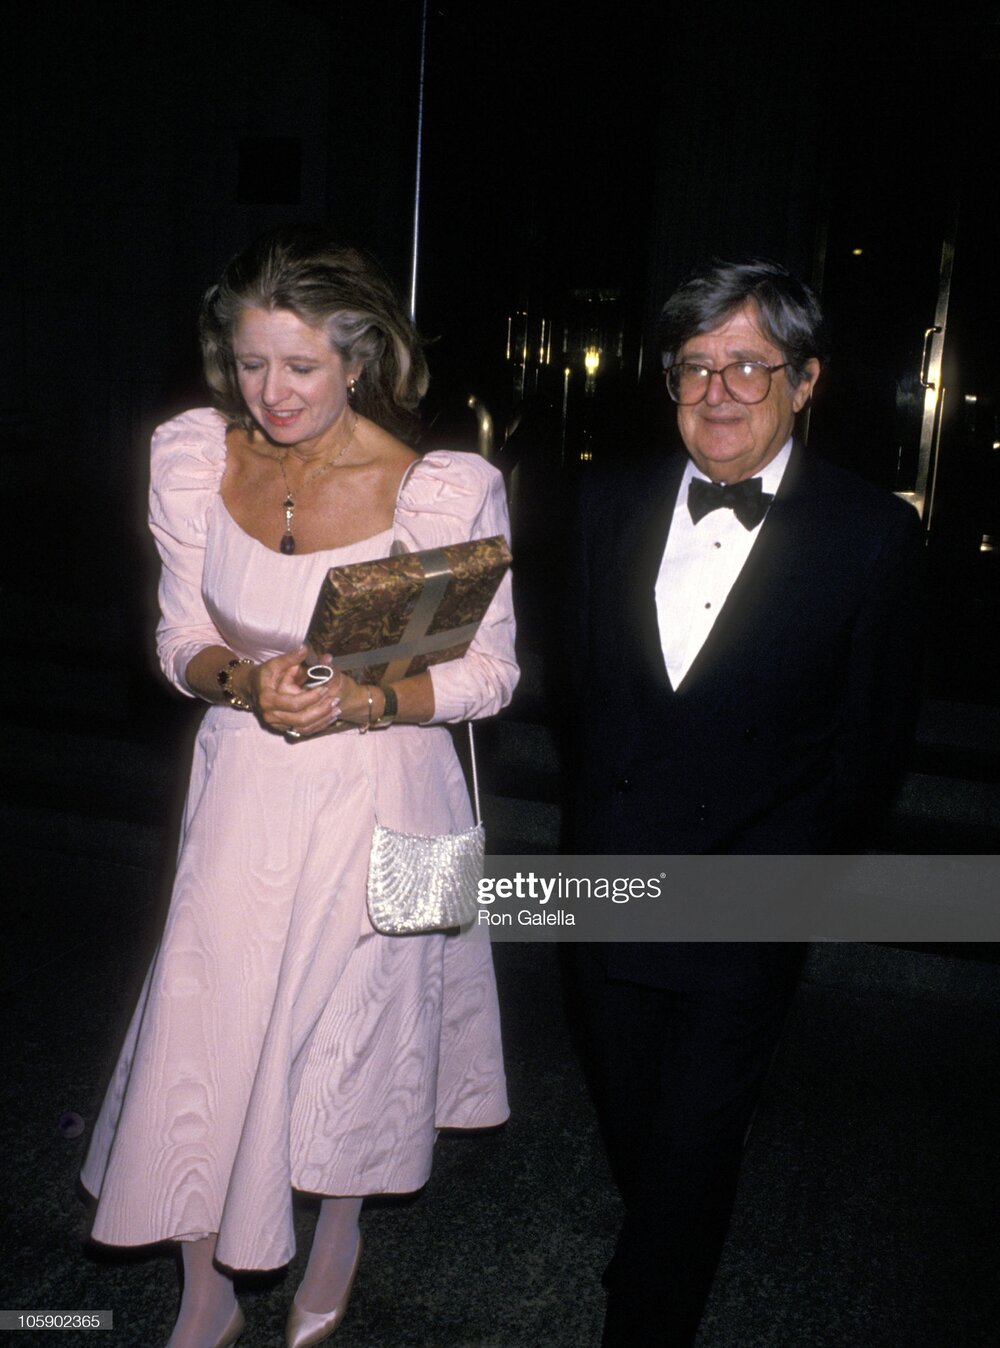 Shirley Lord and Abe Rosenthal at a private party hosted by Carolyn Roehm and Henry Kravis at the Met, September 23, 1988.